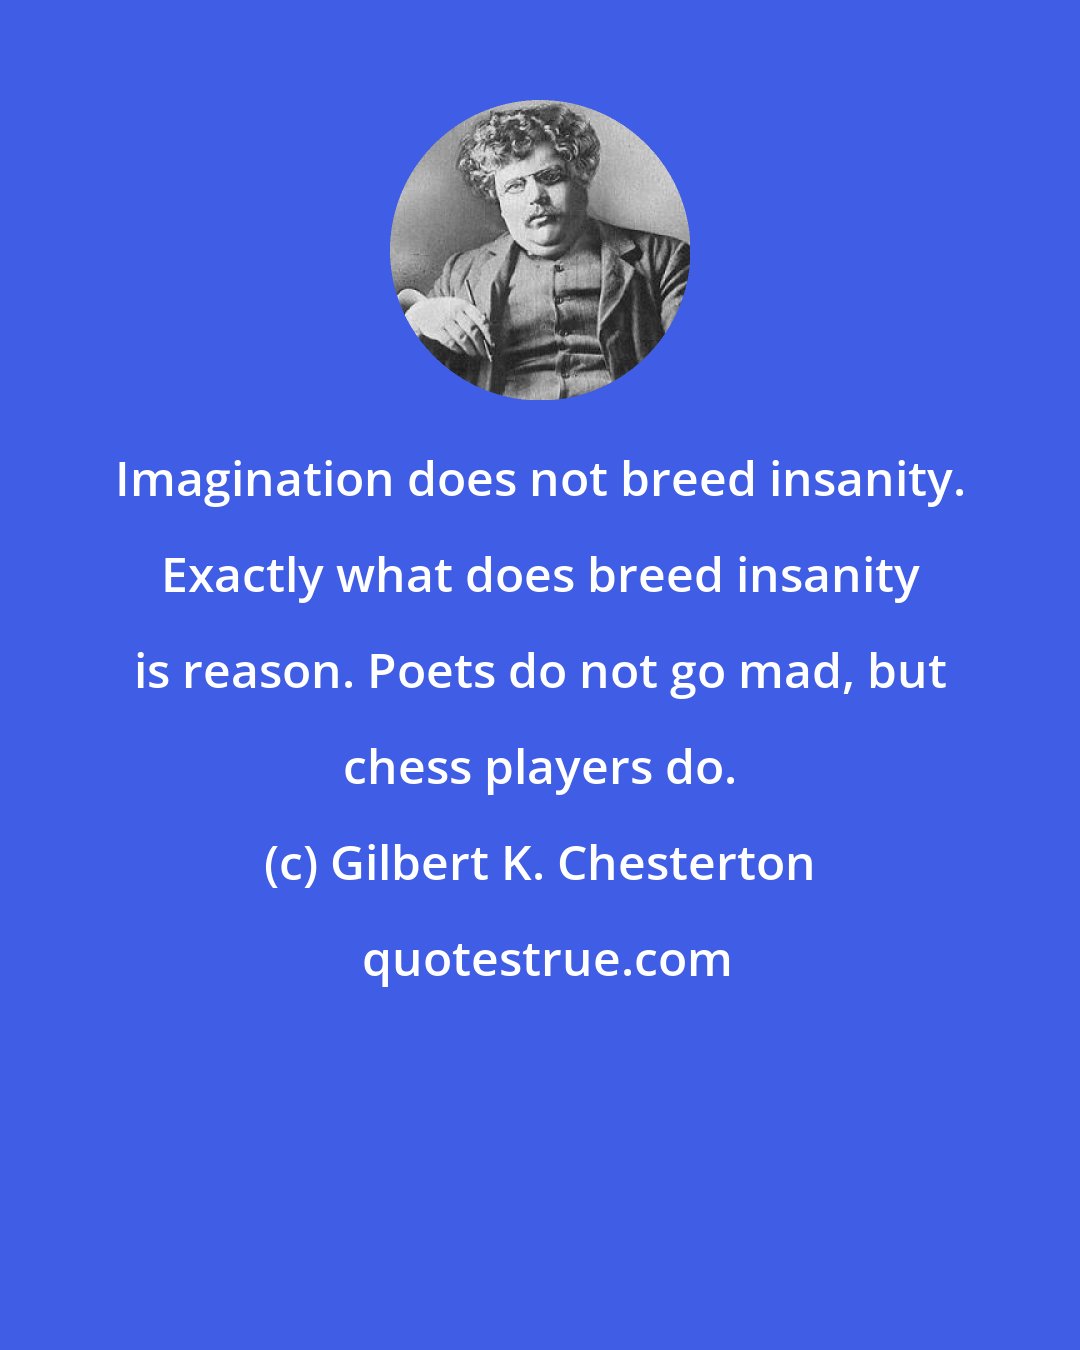 Gilbert K. Chesterton: Imagination does not breed insanity. Exactly what does breed insanity is reason. Poets do not go mad, but chess players do.